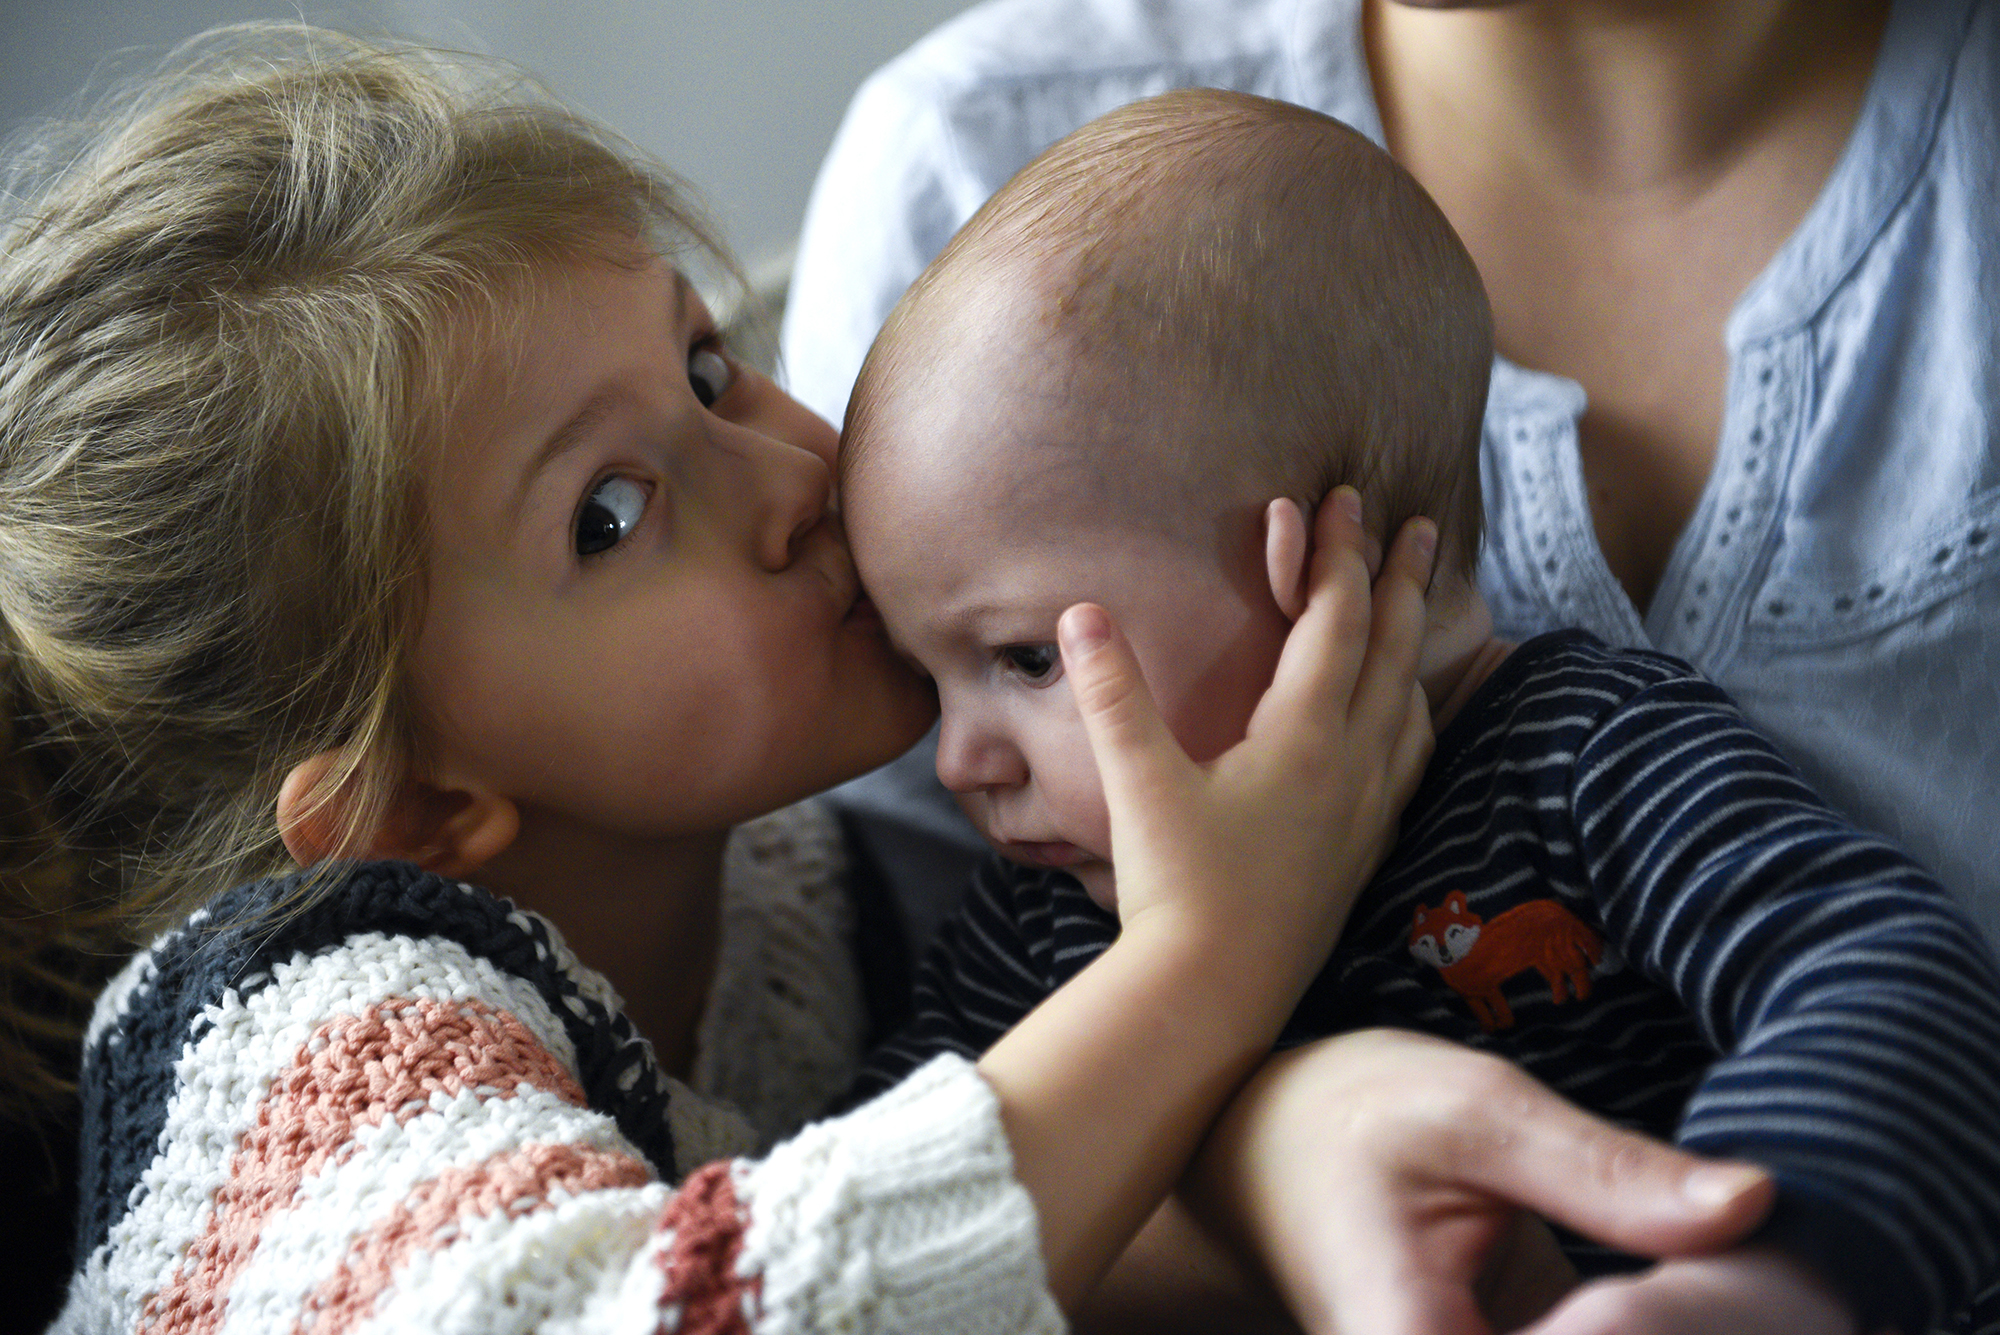 A young girl child kisses her baby brother's head. The baby is leaning towards his sister and is propped up on his mother's lap